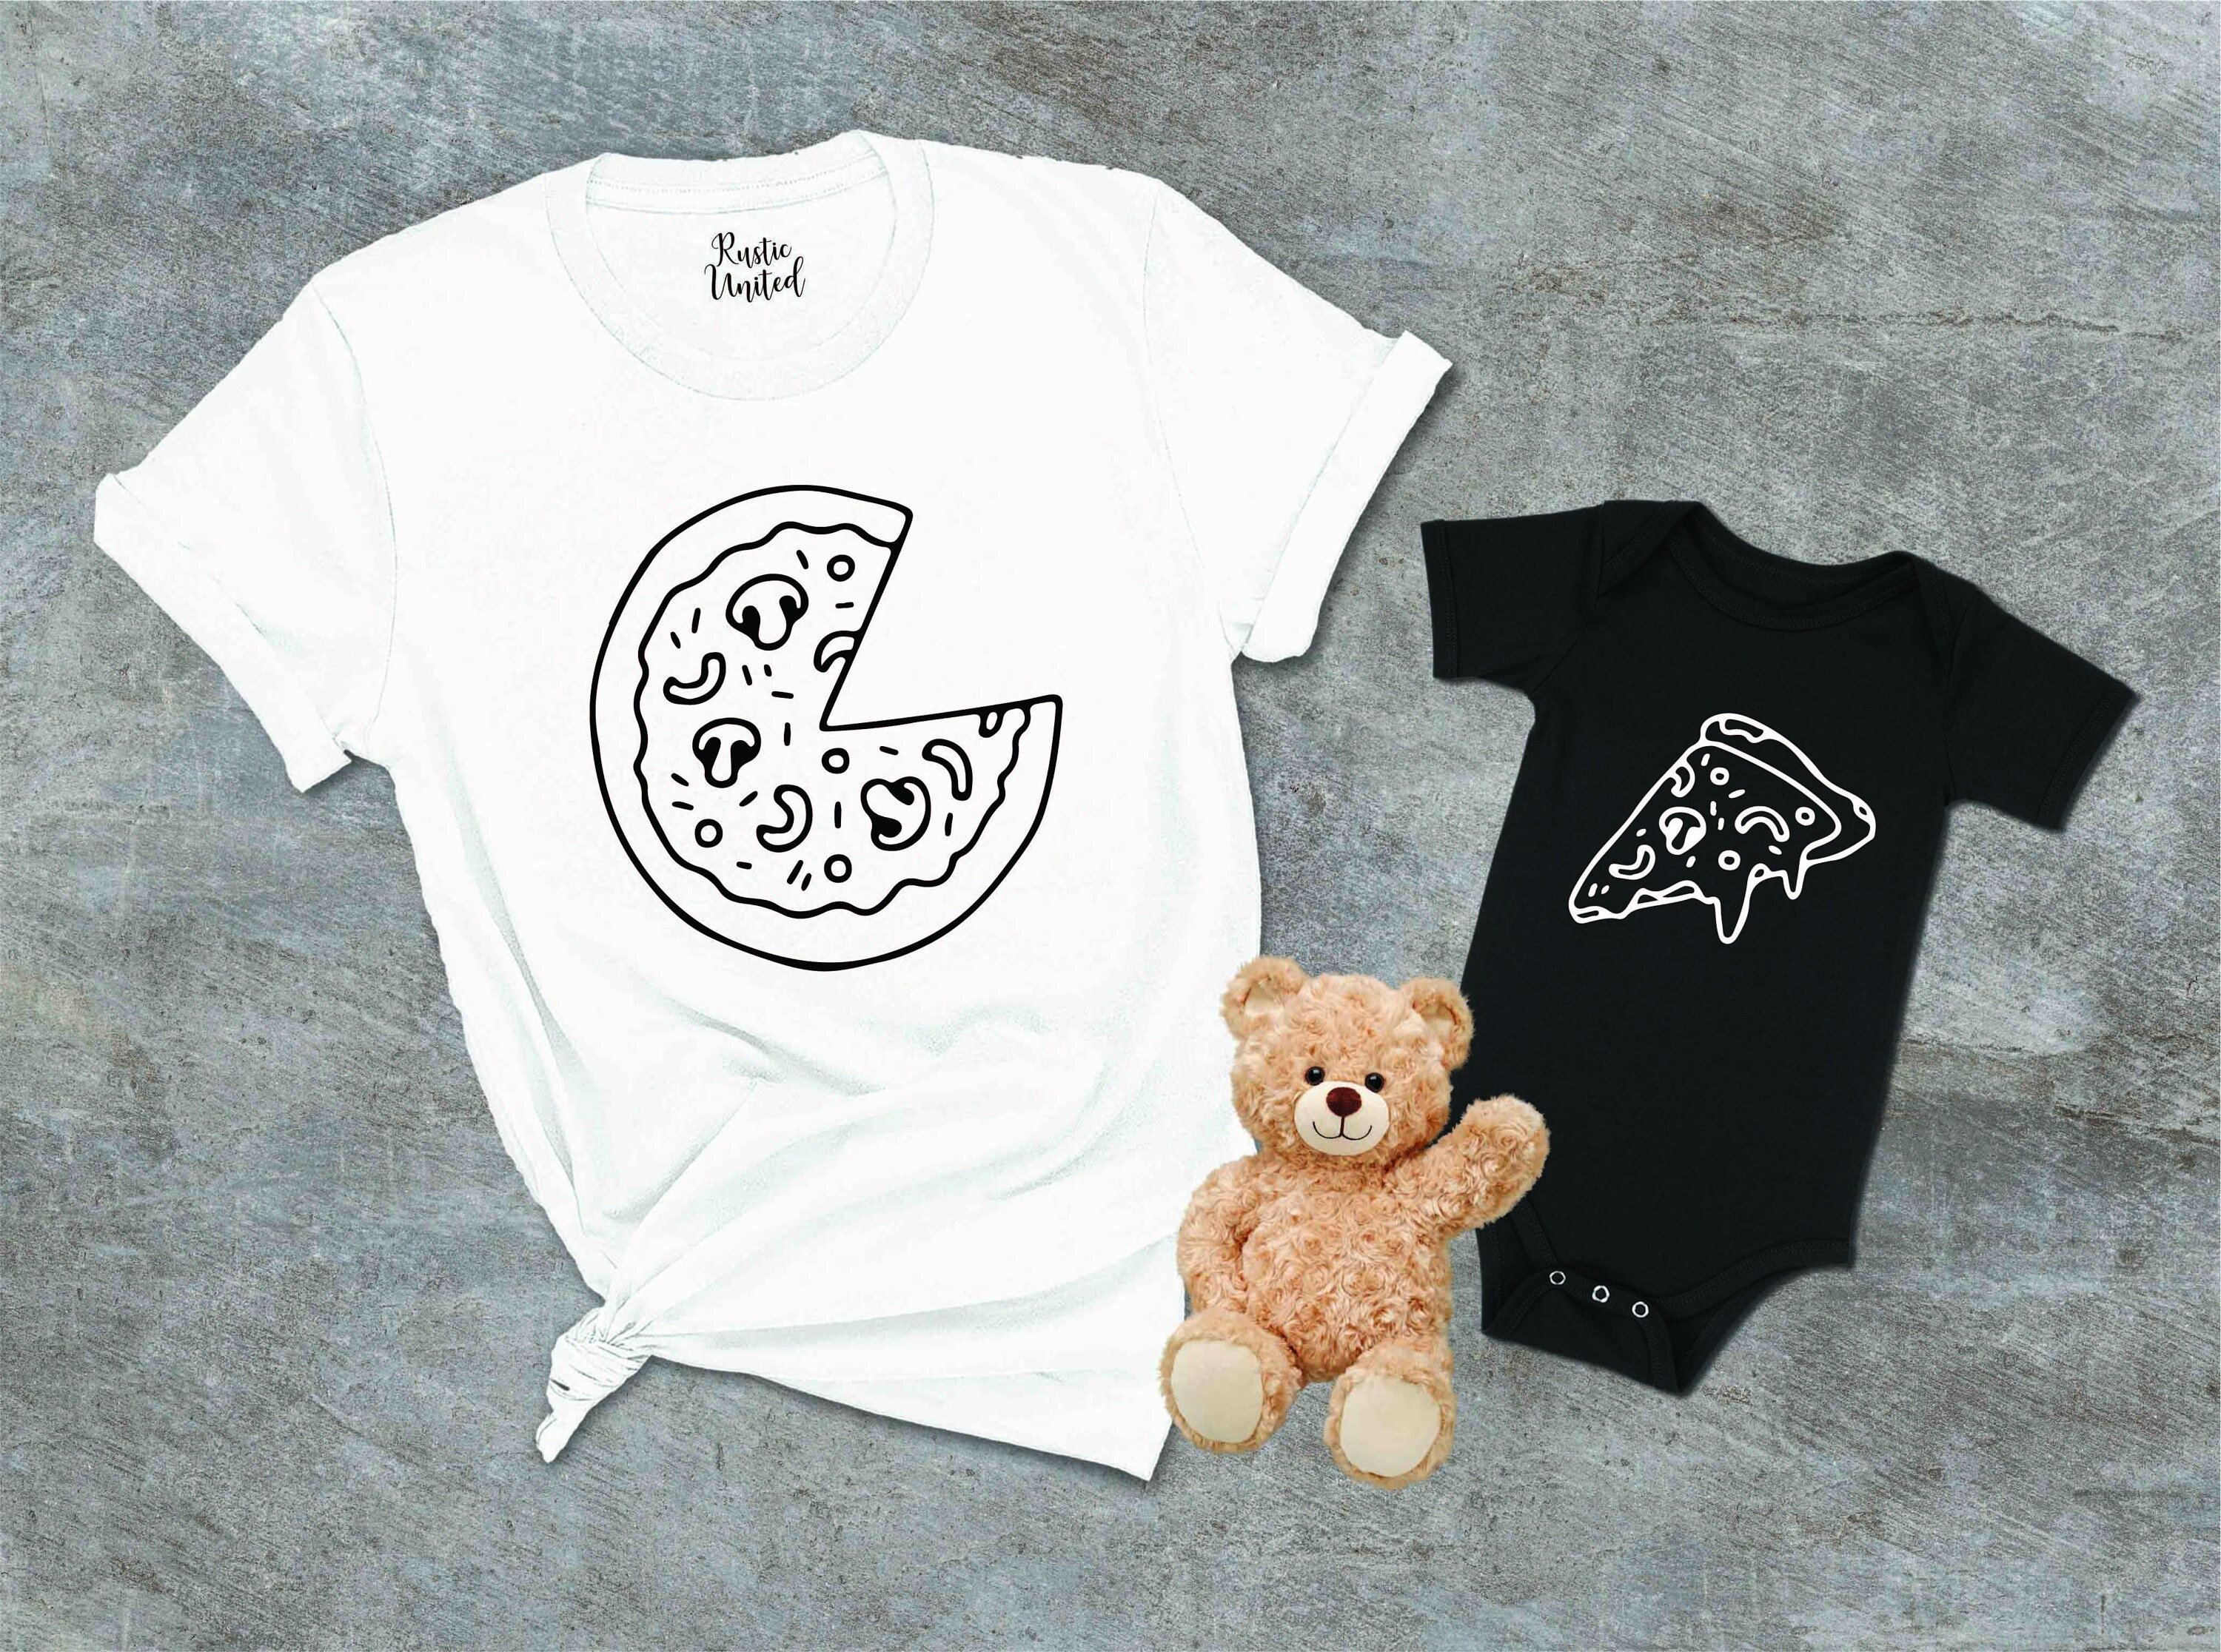 Summer Fun Pizza Print Matching Family Tops For Mom, Dad, And Kids Cotton T  Shirt And Bodysuit Set 230505 From Qiyuan06, $8.72